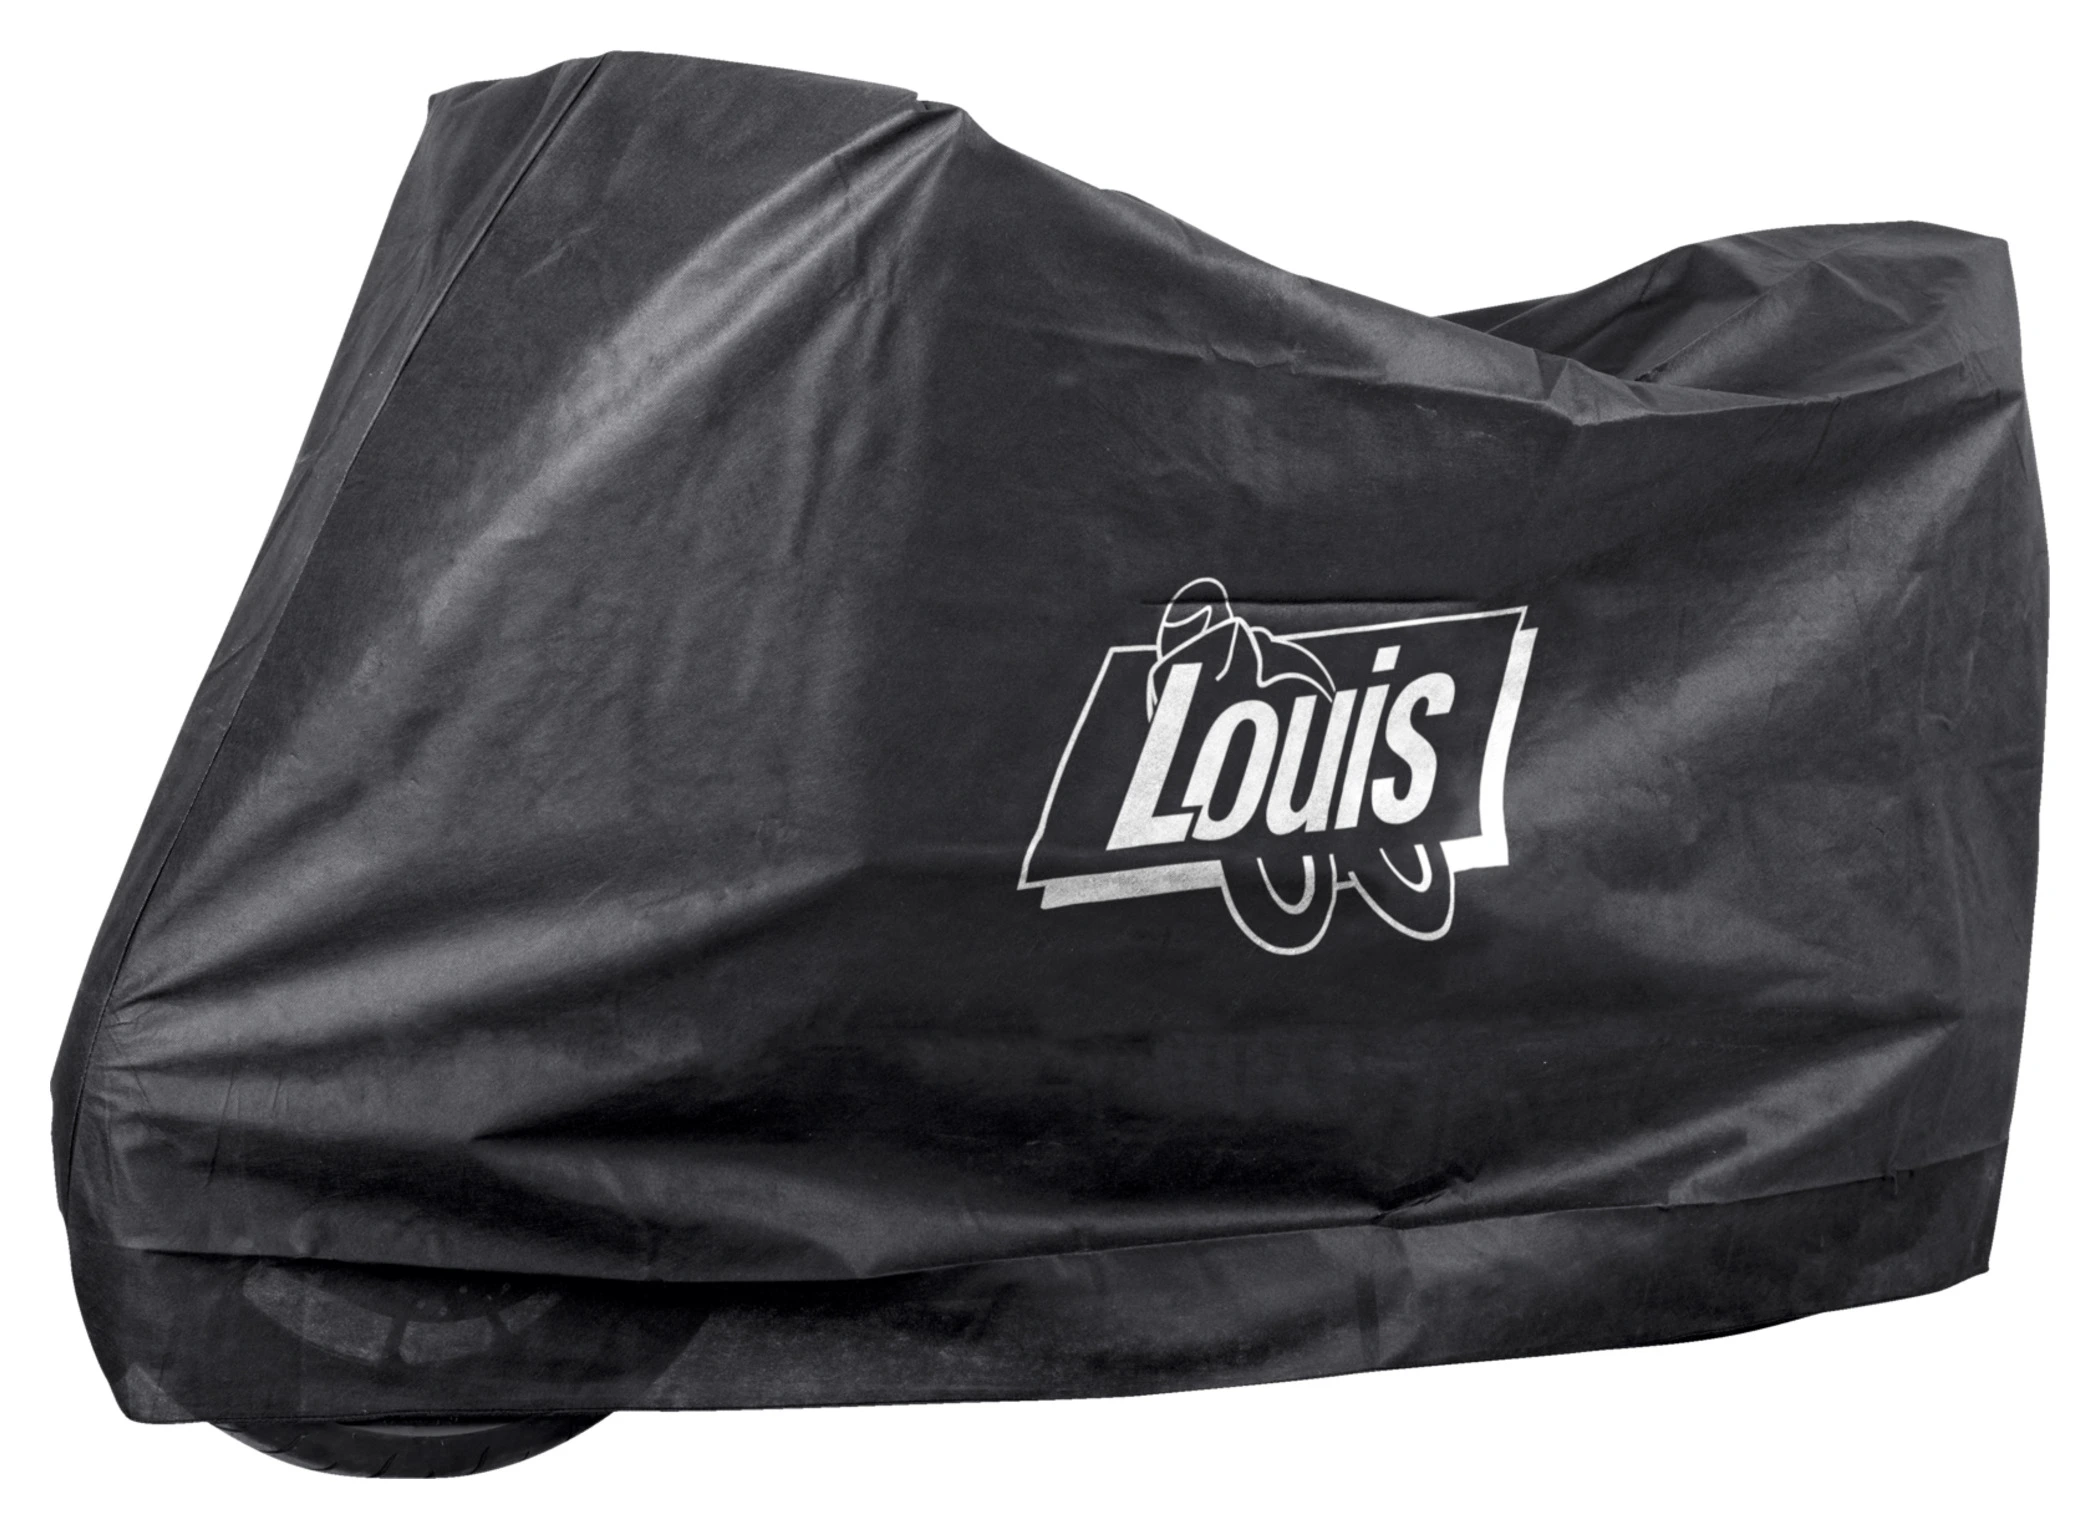 Motorcycle Dust Cover